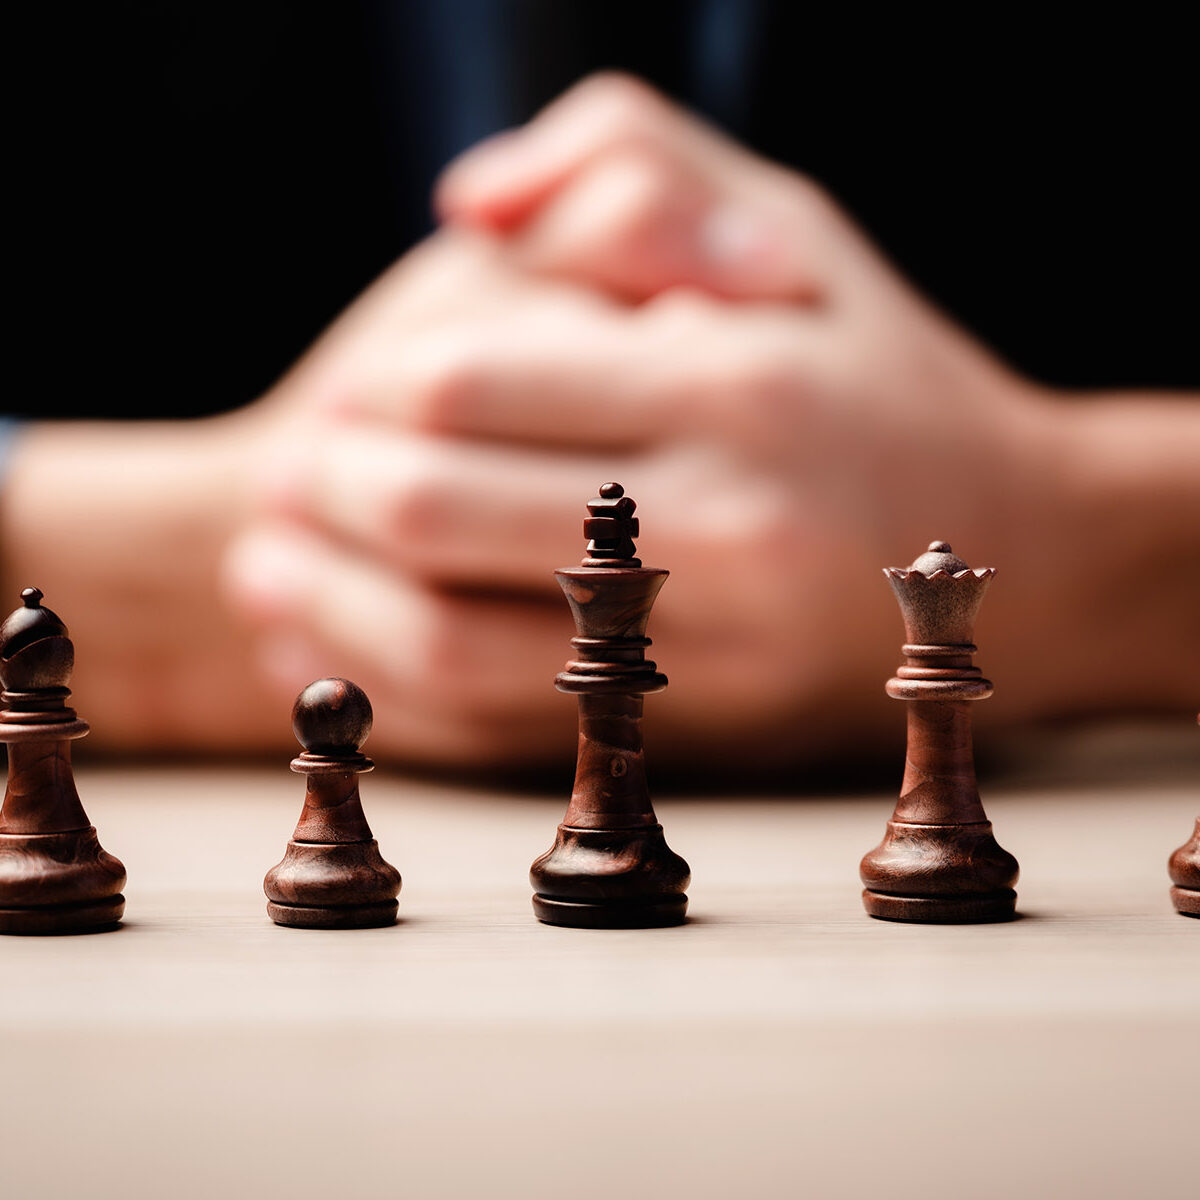 chess strategy for business leadership and team in success concept, game king leader